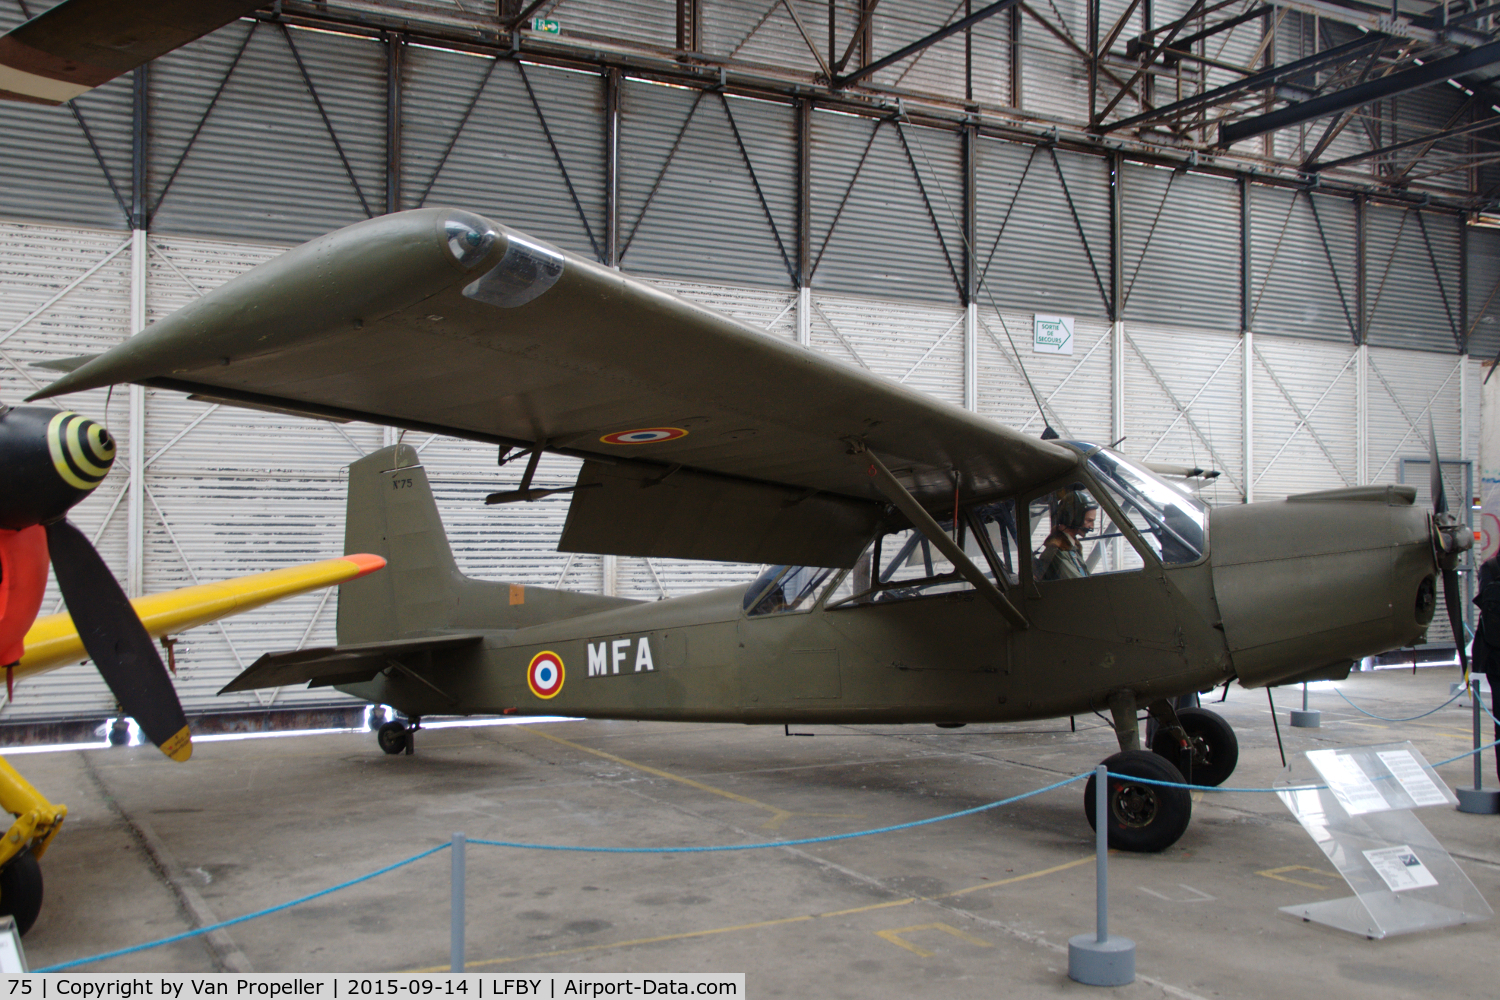 75, Nord 3400 Norbarbe C/N 75, Nord 3400 Norbarbe observation aircraft of the French Army light aviation service in the ALAT museum in Dax, France